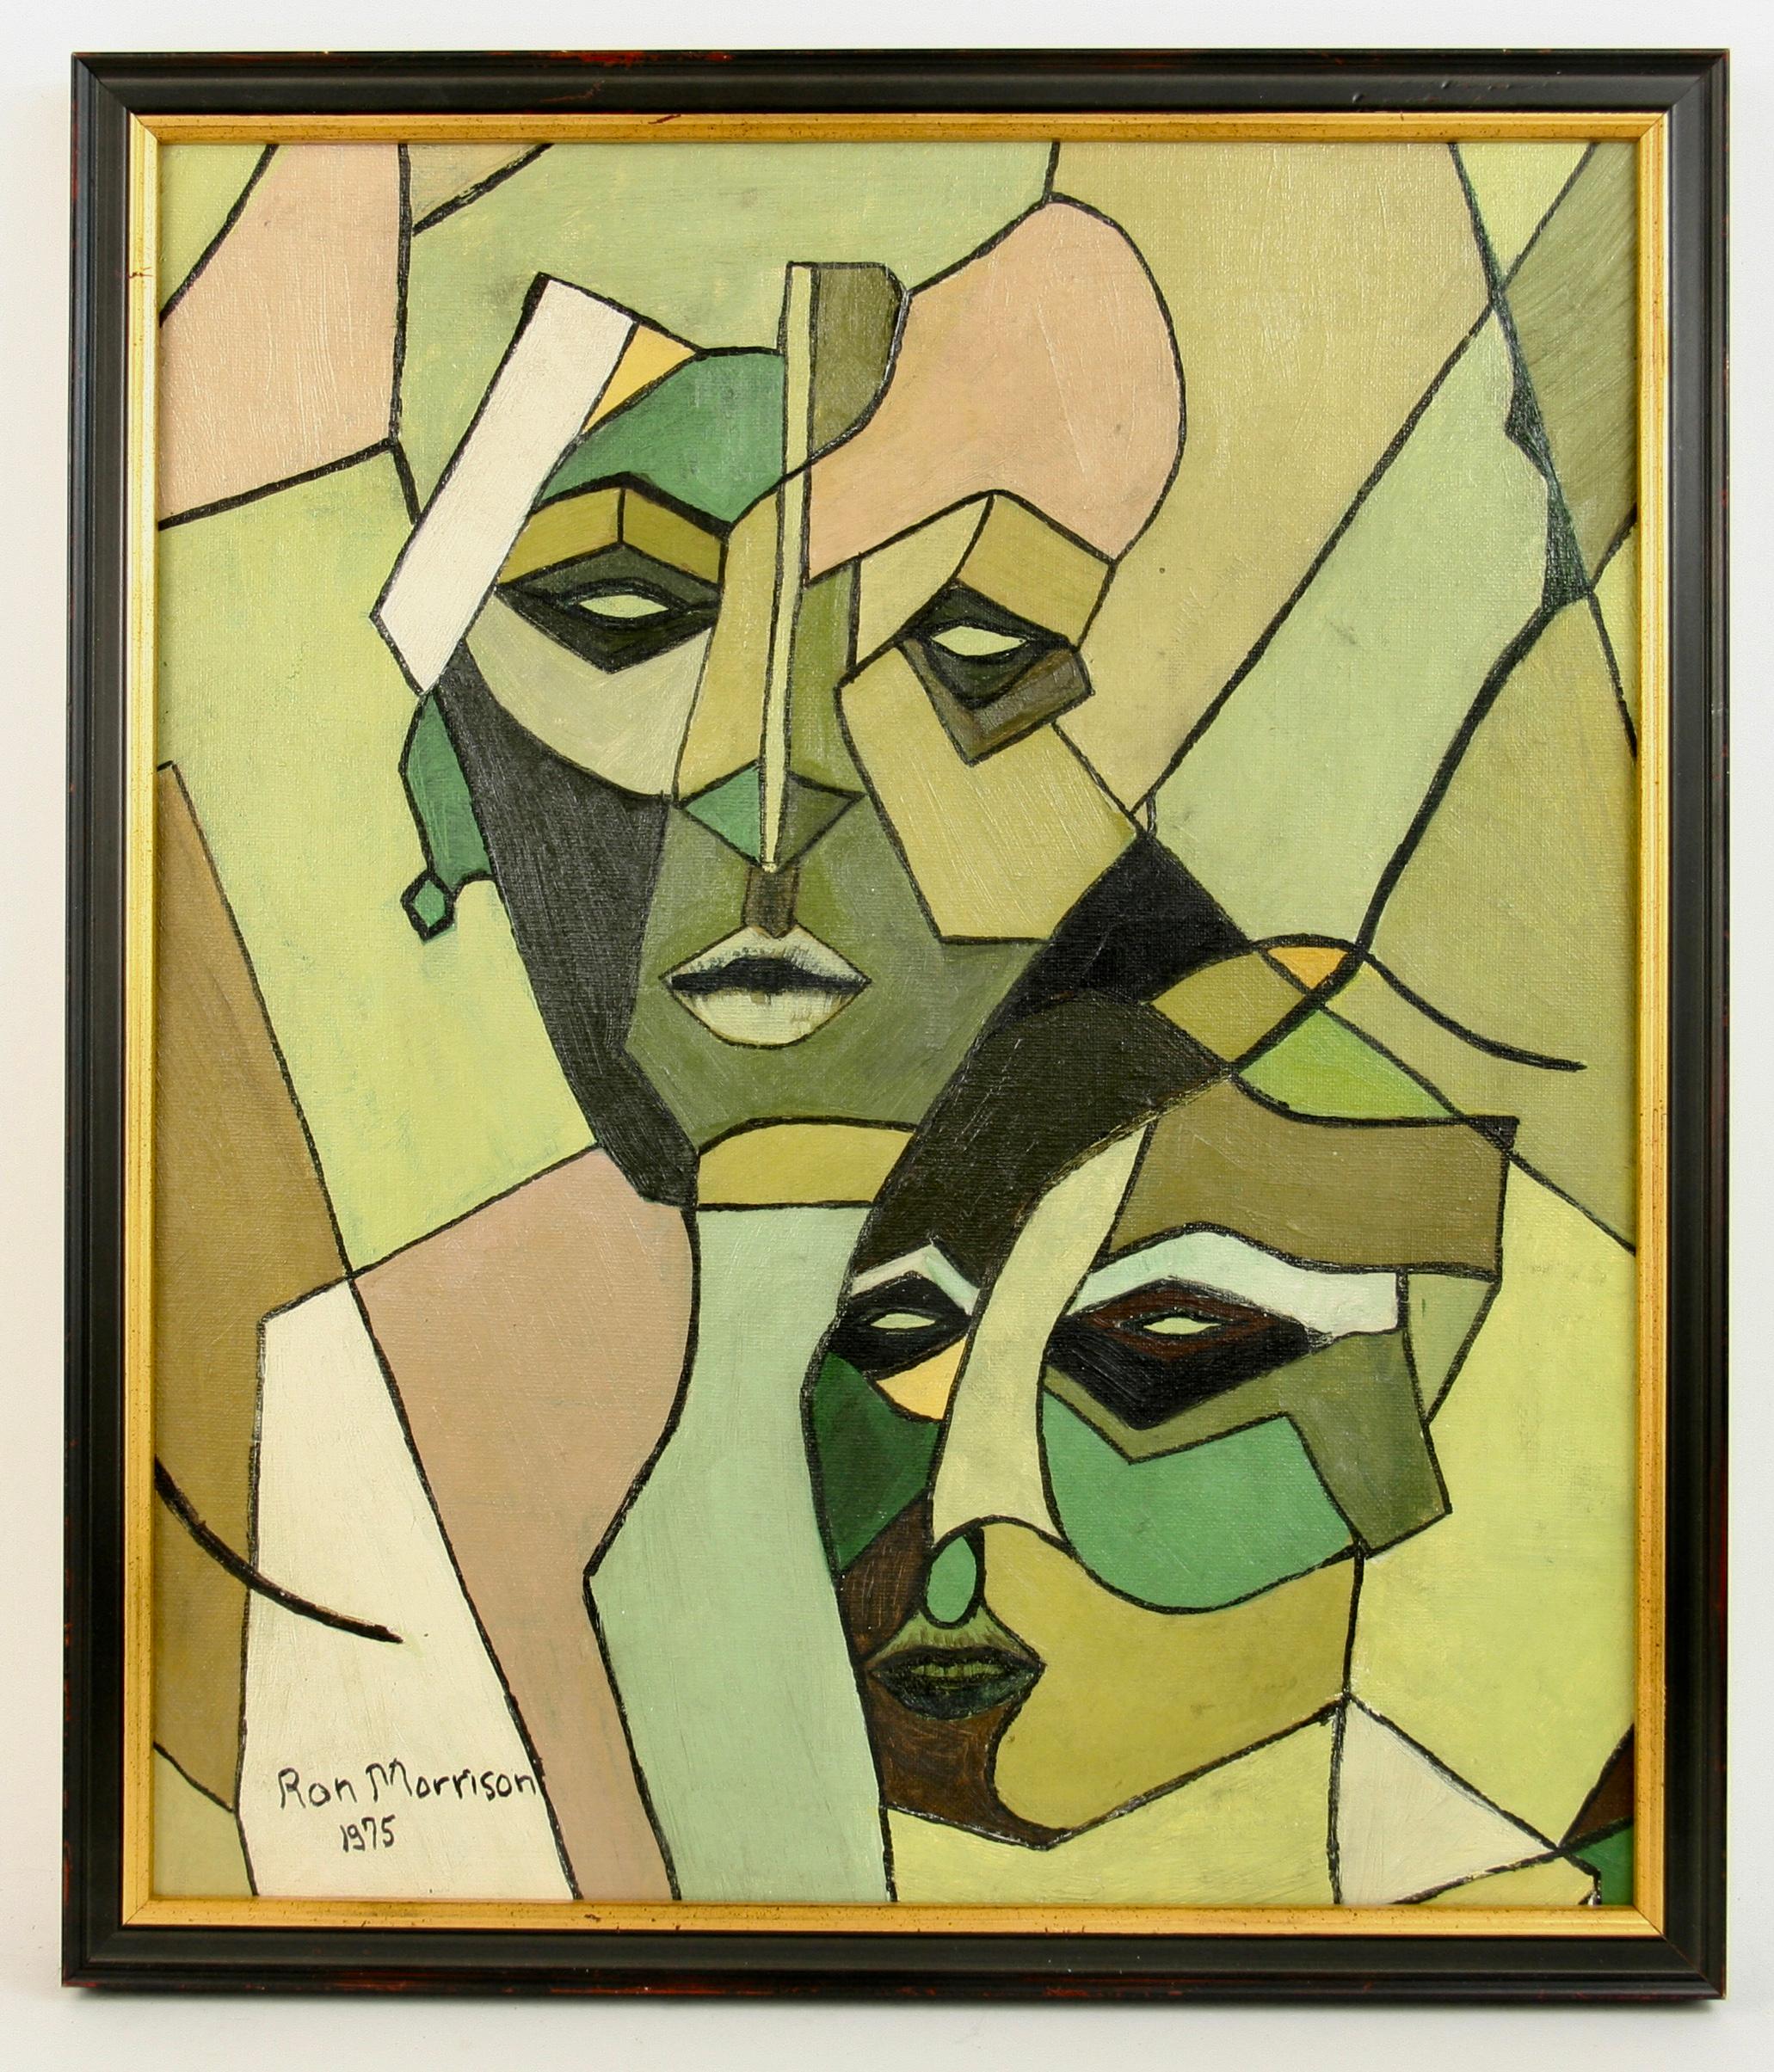 #5-3341a  Cubism  style figurative painting, vintage acrylic on artist board signed by Ron Morrison 1975, displayed in a black -gilt wood frame.Image size 14.75 H x 12.50 W